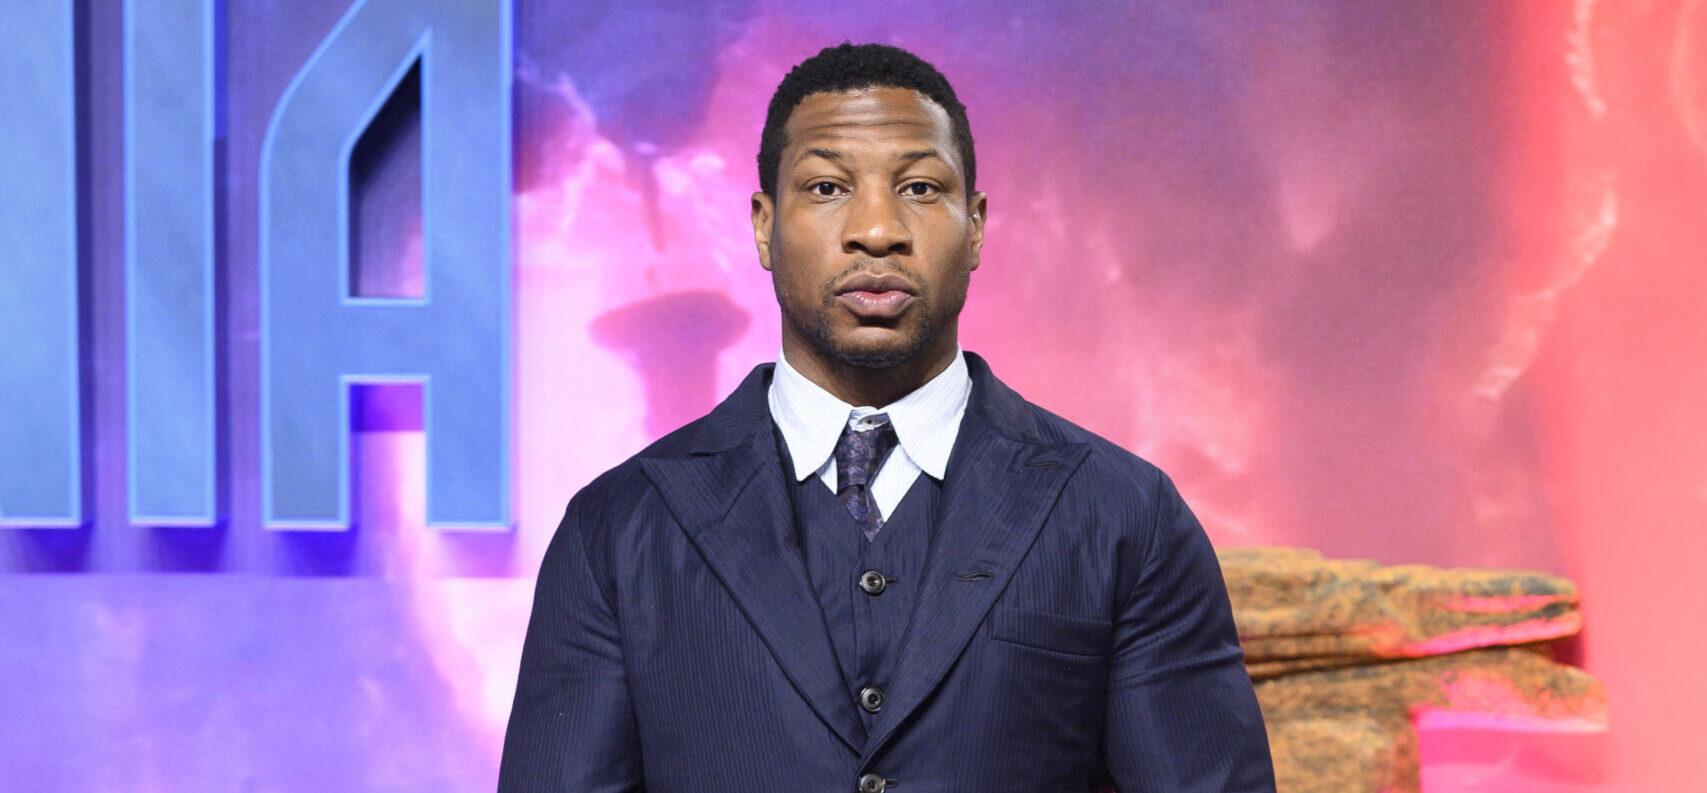 Jonathan Majors Accused Of ‘Diet Control’ And ‘Punching Walls’ In Wild Exposé